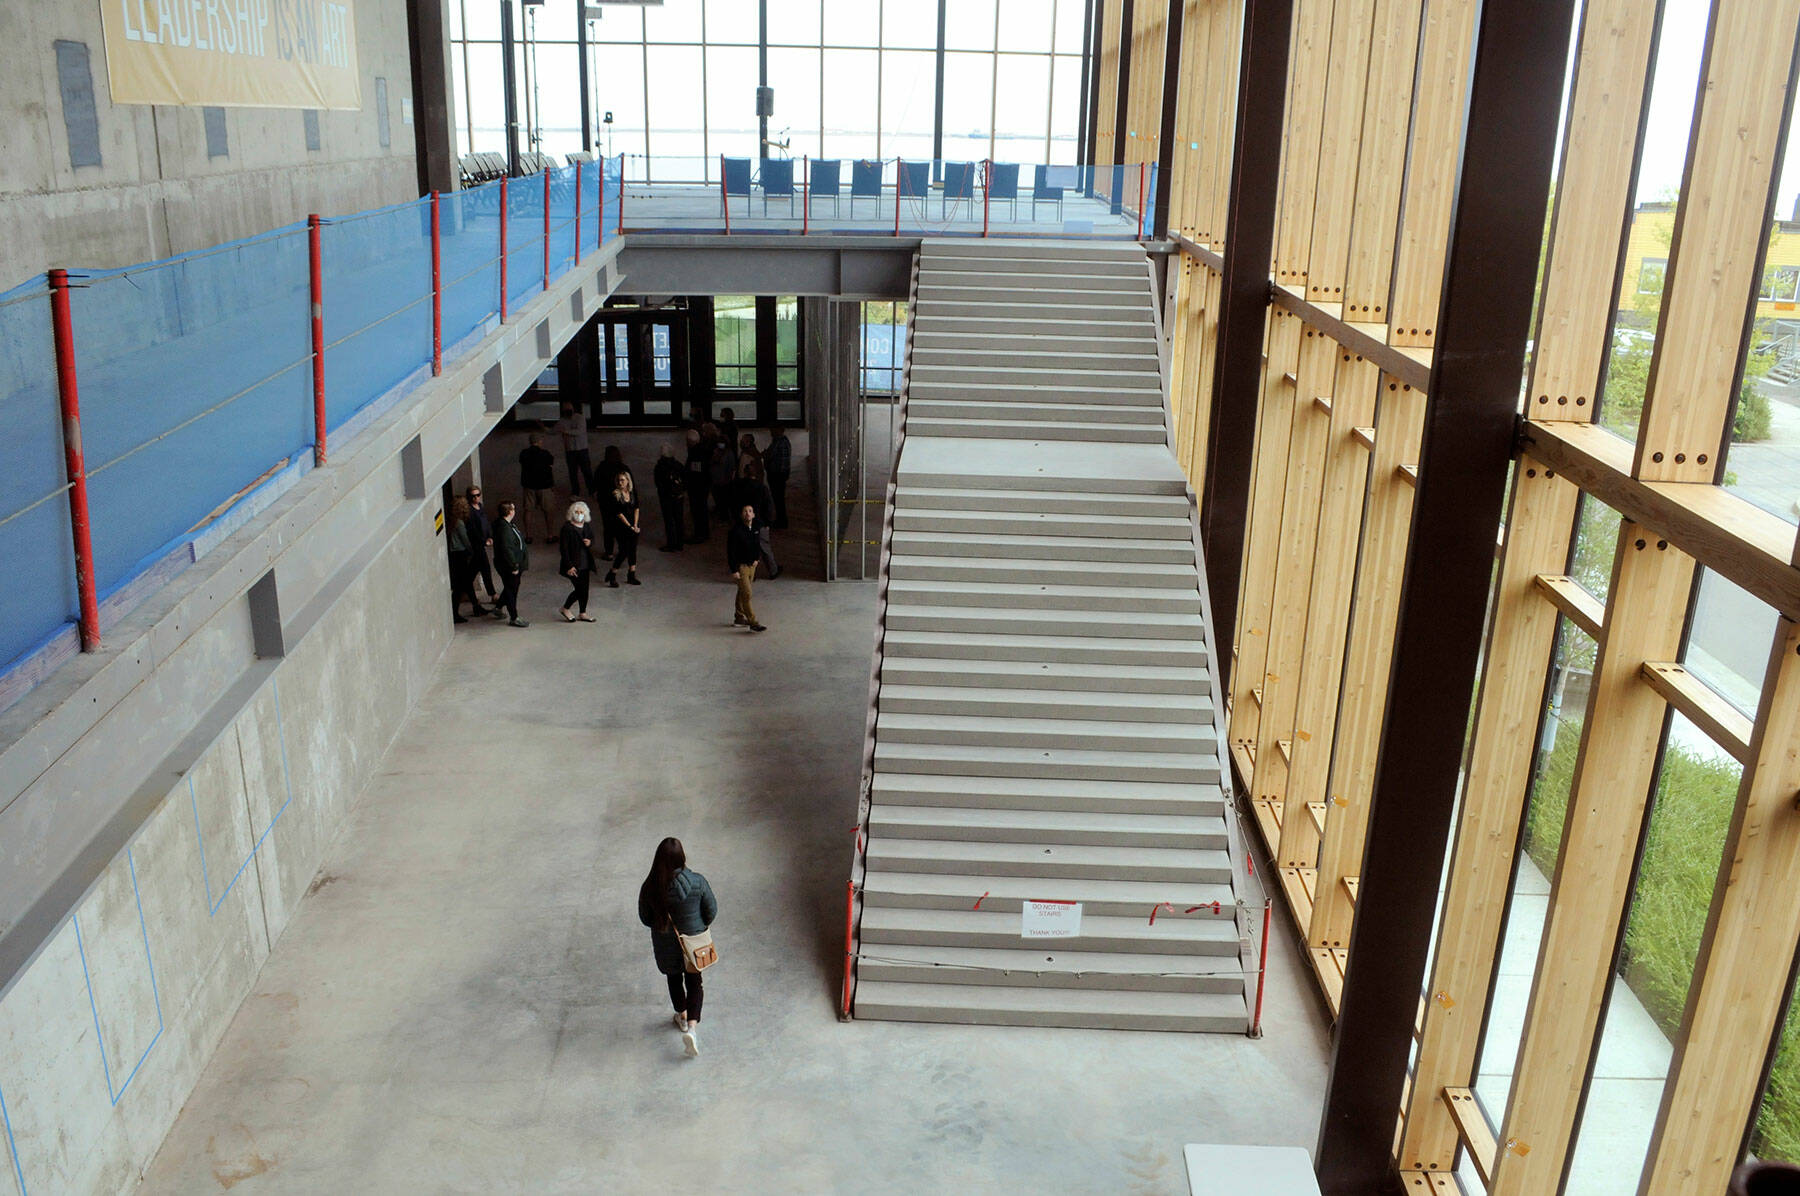 A grand staircase rises from the lobby of the Field Hall Arts & Events Center. (Keith Thorpe/Peninsula Daily News)